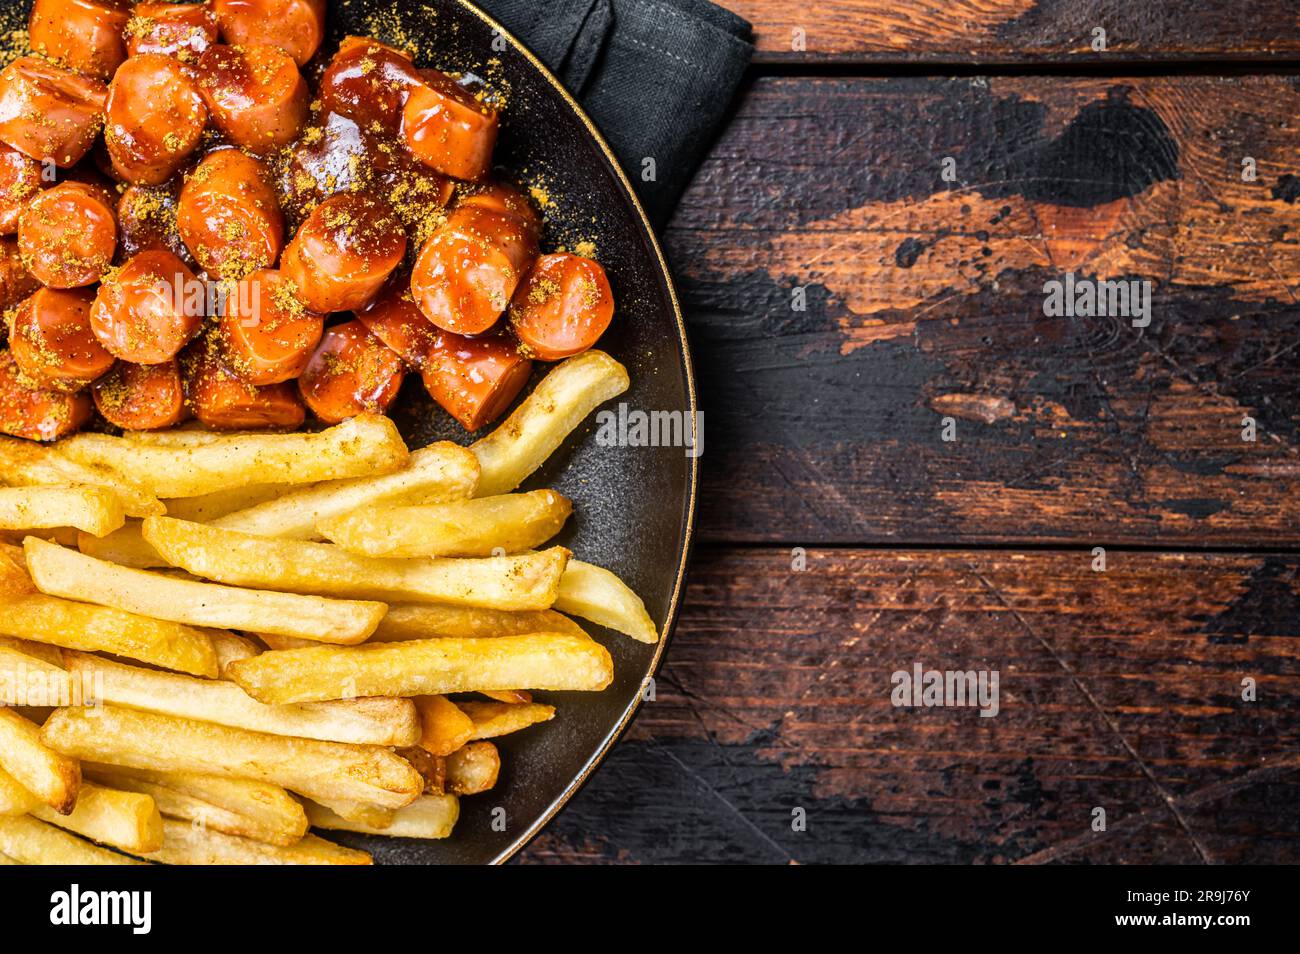 German currywurst meal, curry wurst with french fry served in a plate. Wooden background. Top view. Stock Photo